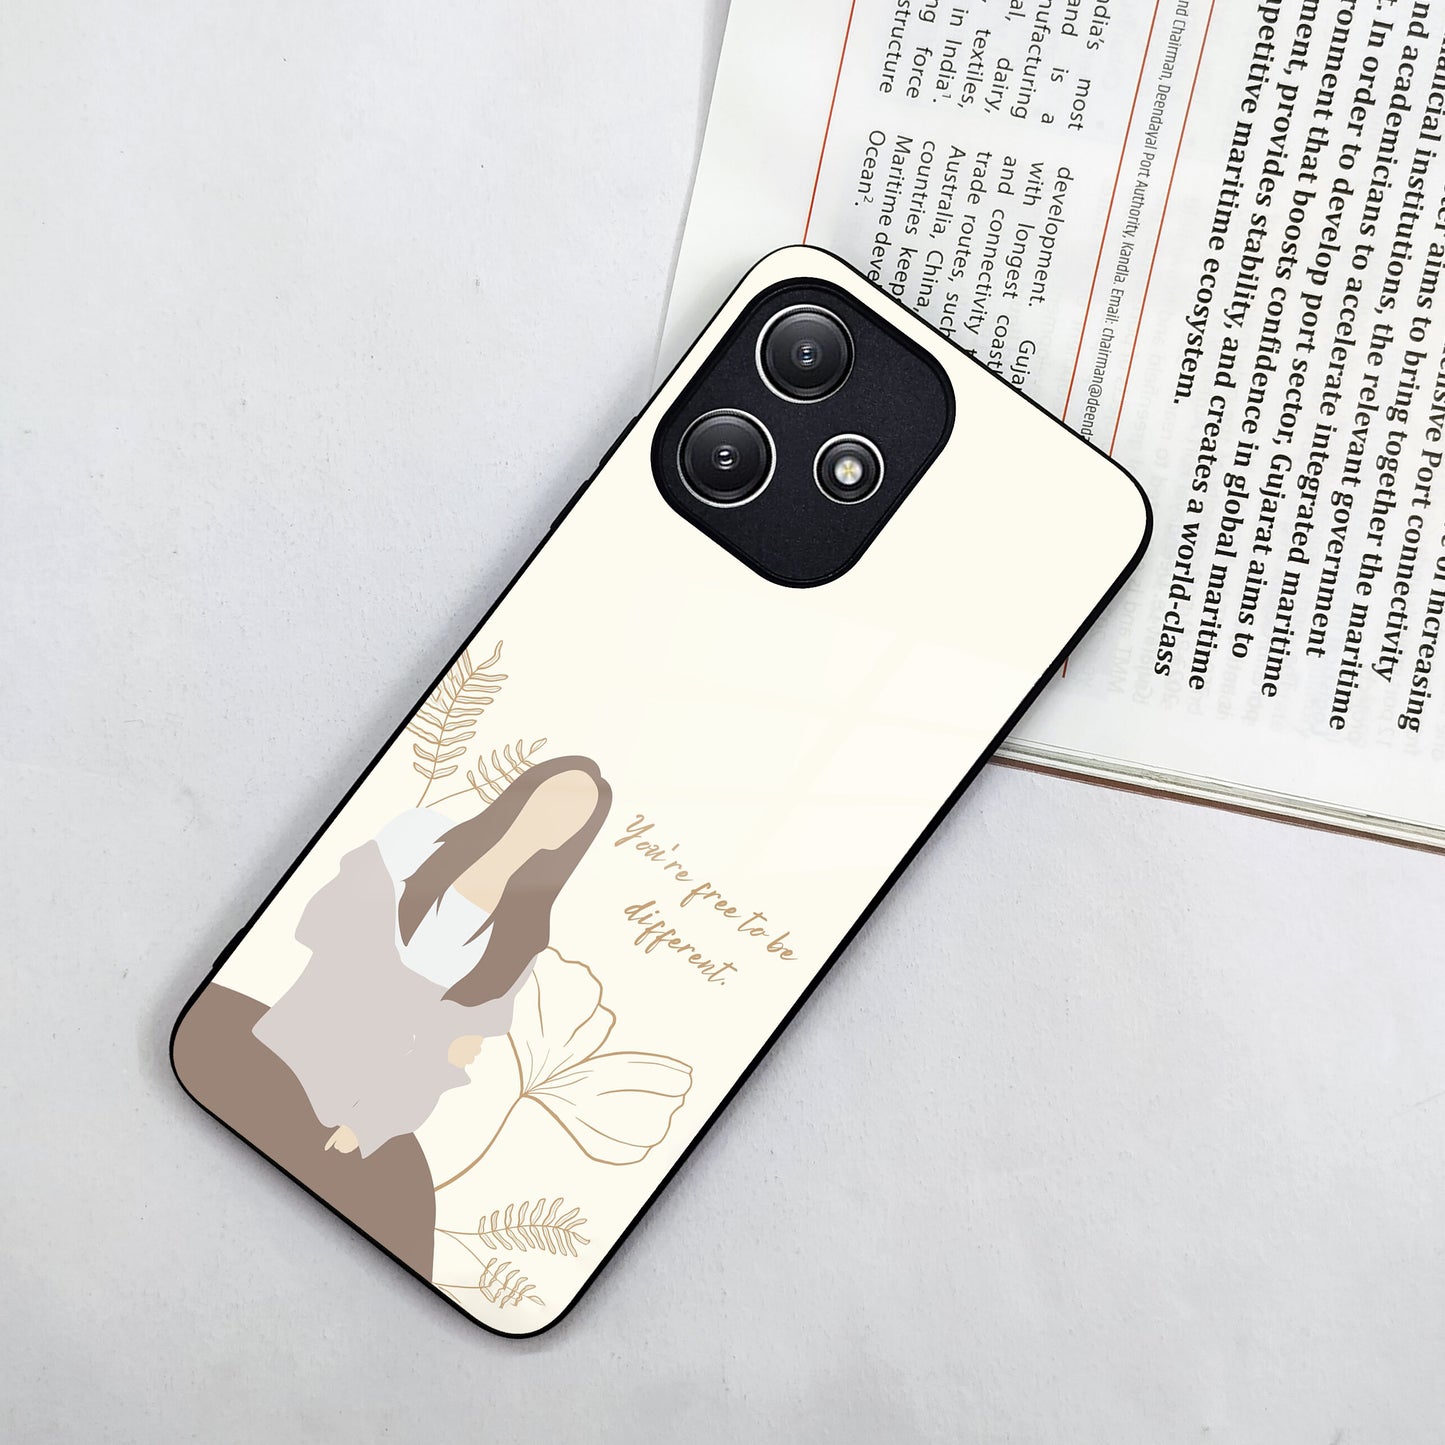 Always Stay Humble And Kind  Glass Phone Cover V2 for Redmi/Xiaomi